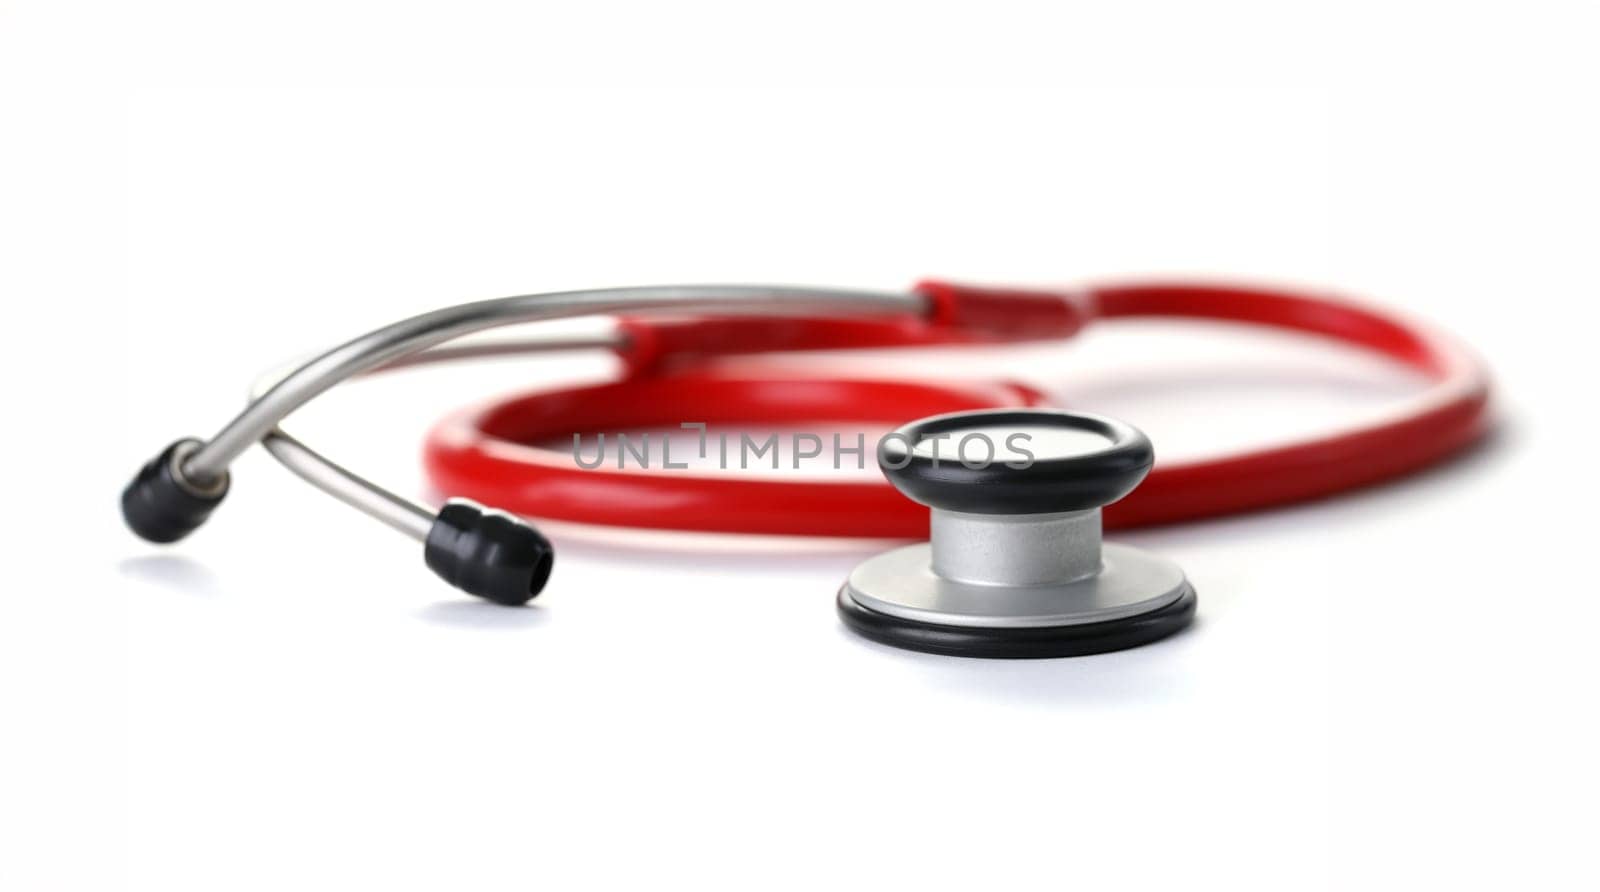 Red stethoscope with black silver head isolated on whote background. Medical education object concept